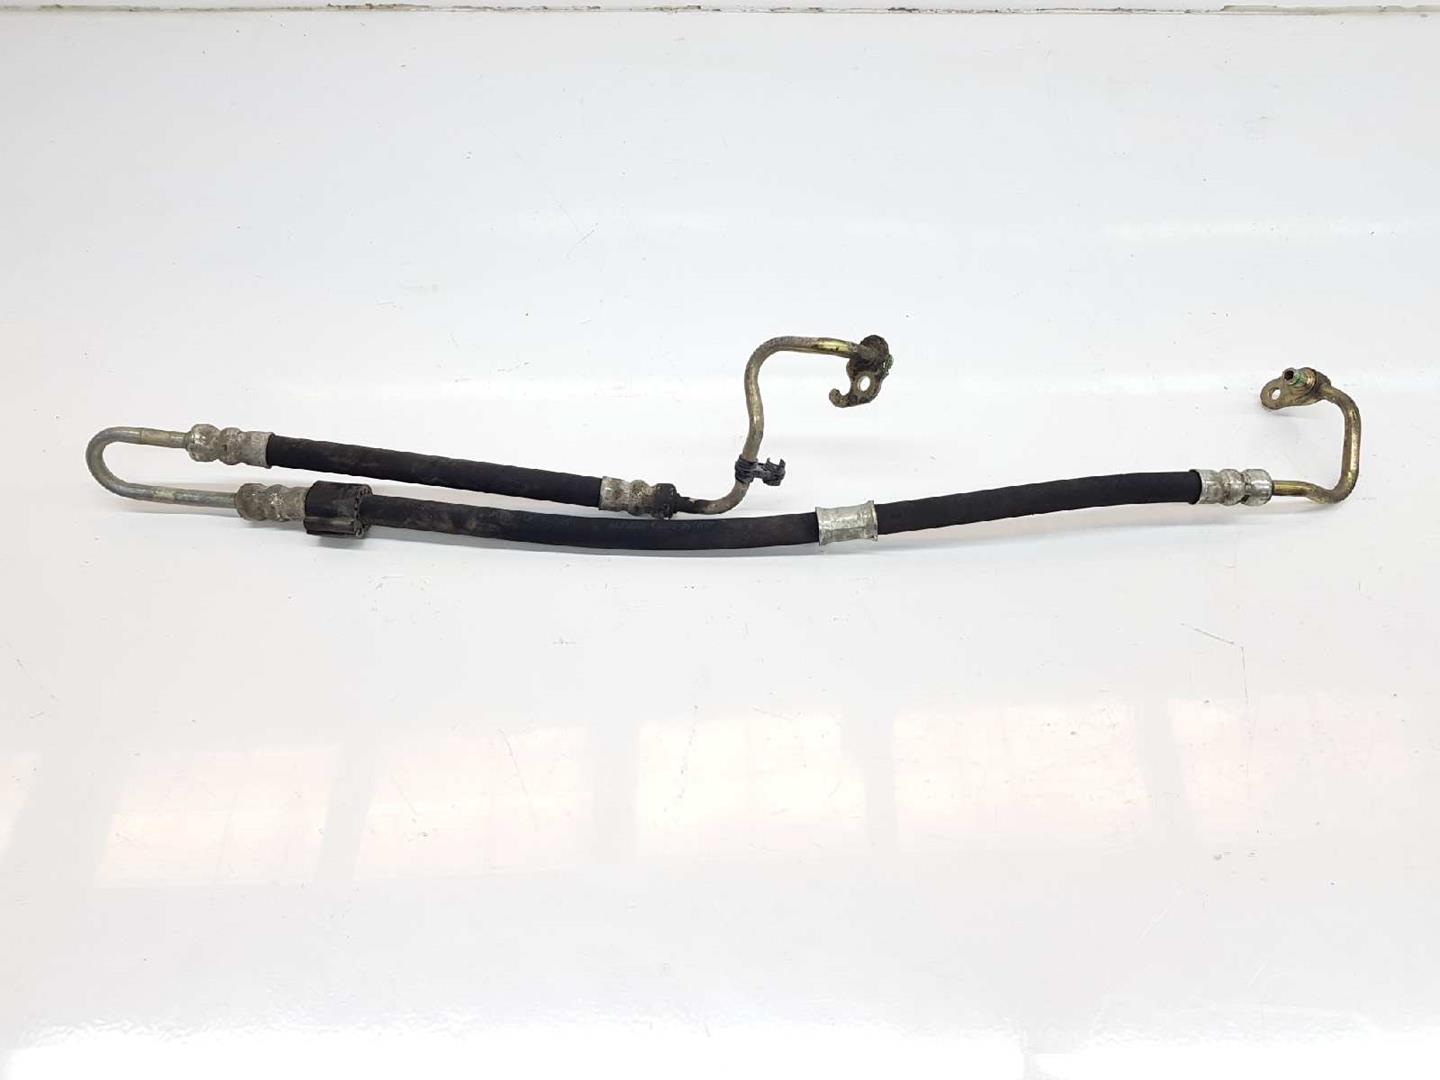 LAND ROVER Discovery 4 generation (2009-2016) Coolant Hose Pipe AH223L600CA, AH223L600CA 24533592